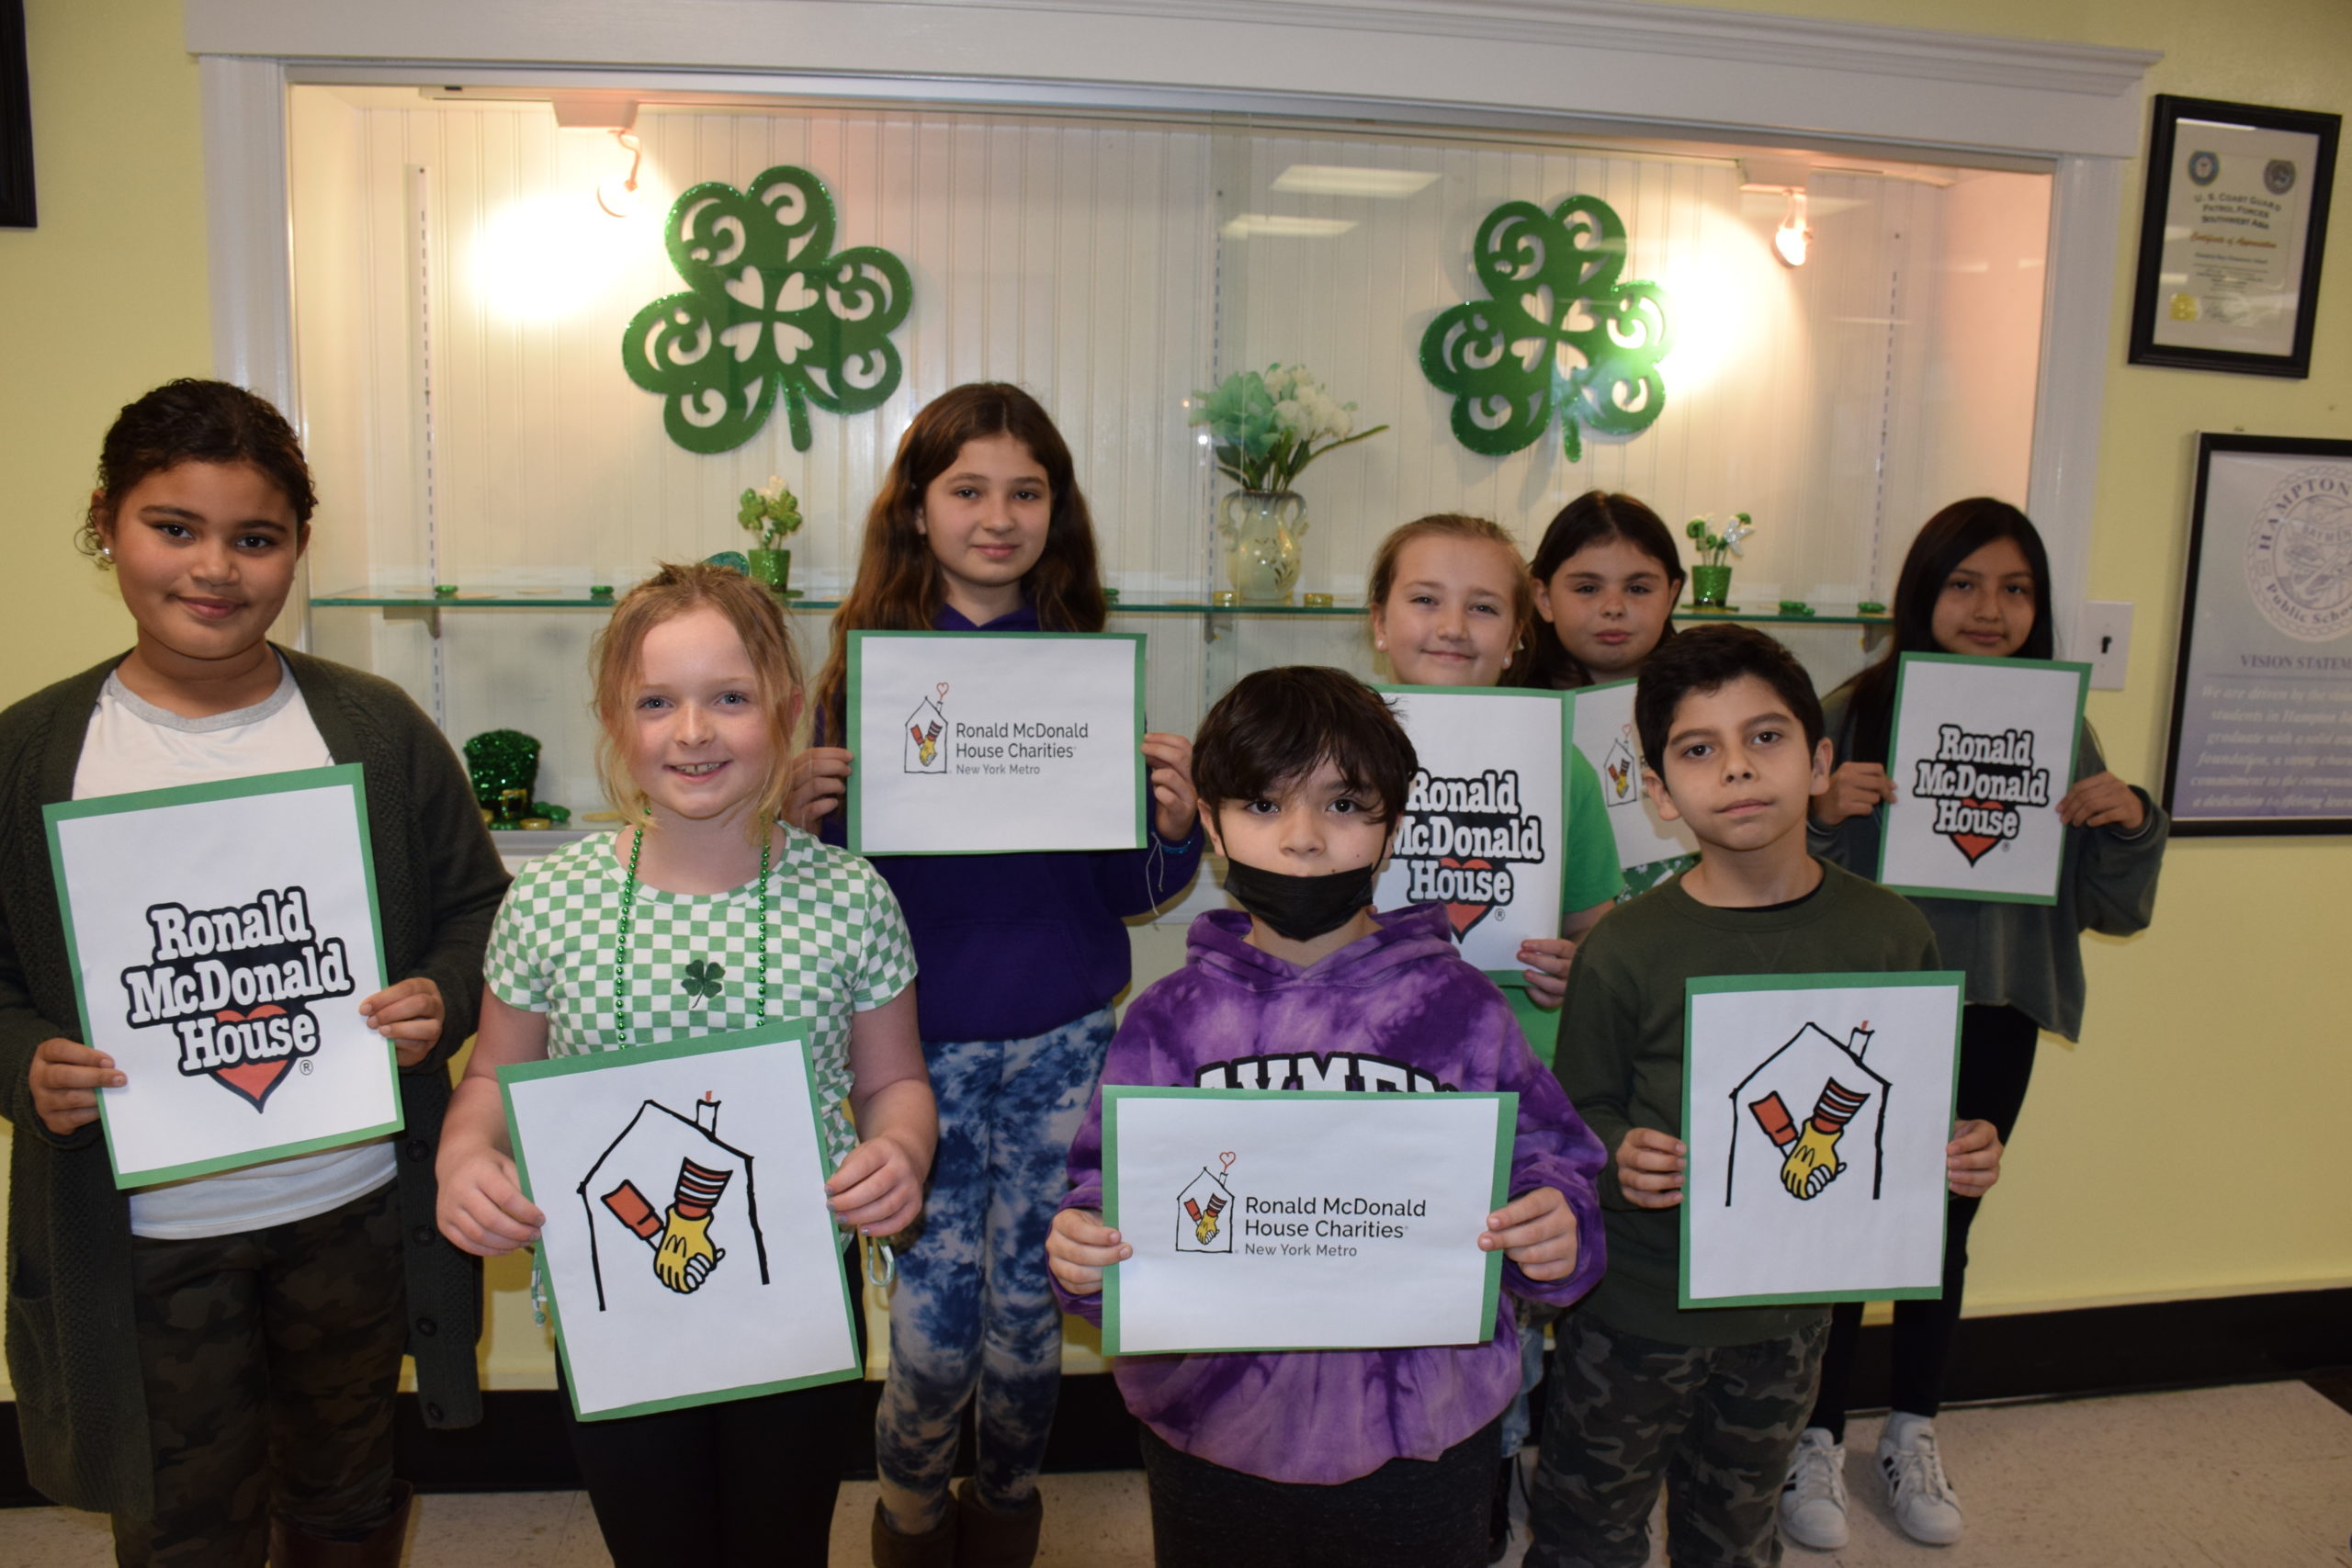 Hampton Bays Elementary School’s community service club, K-Kids, recently donated $100 to the Ronald McDonald House as part of a St. Patrick’s Day-themed fundraiser. To raise the funds, the students sold four-leaf clover necklaces during their lunch periods. The fundraiser is just one of several that the K-Kids have participated in this year; they've also raised money for breast cancer and autism charities.